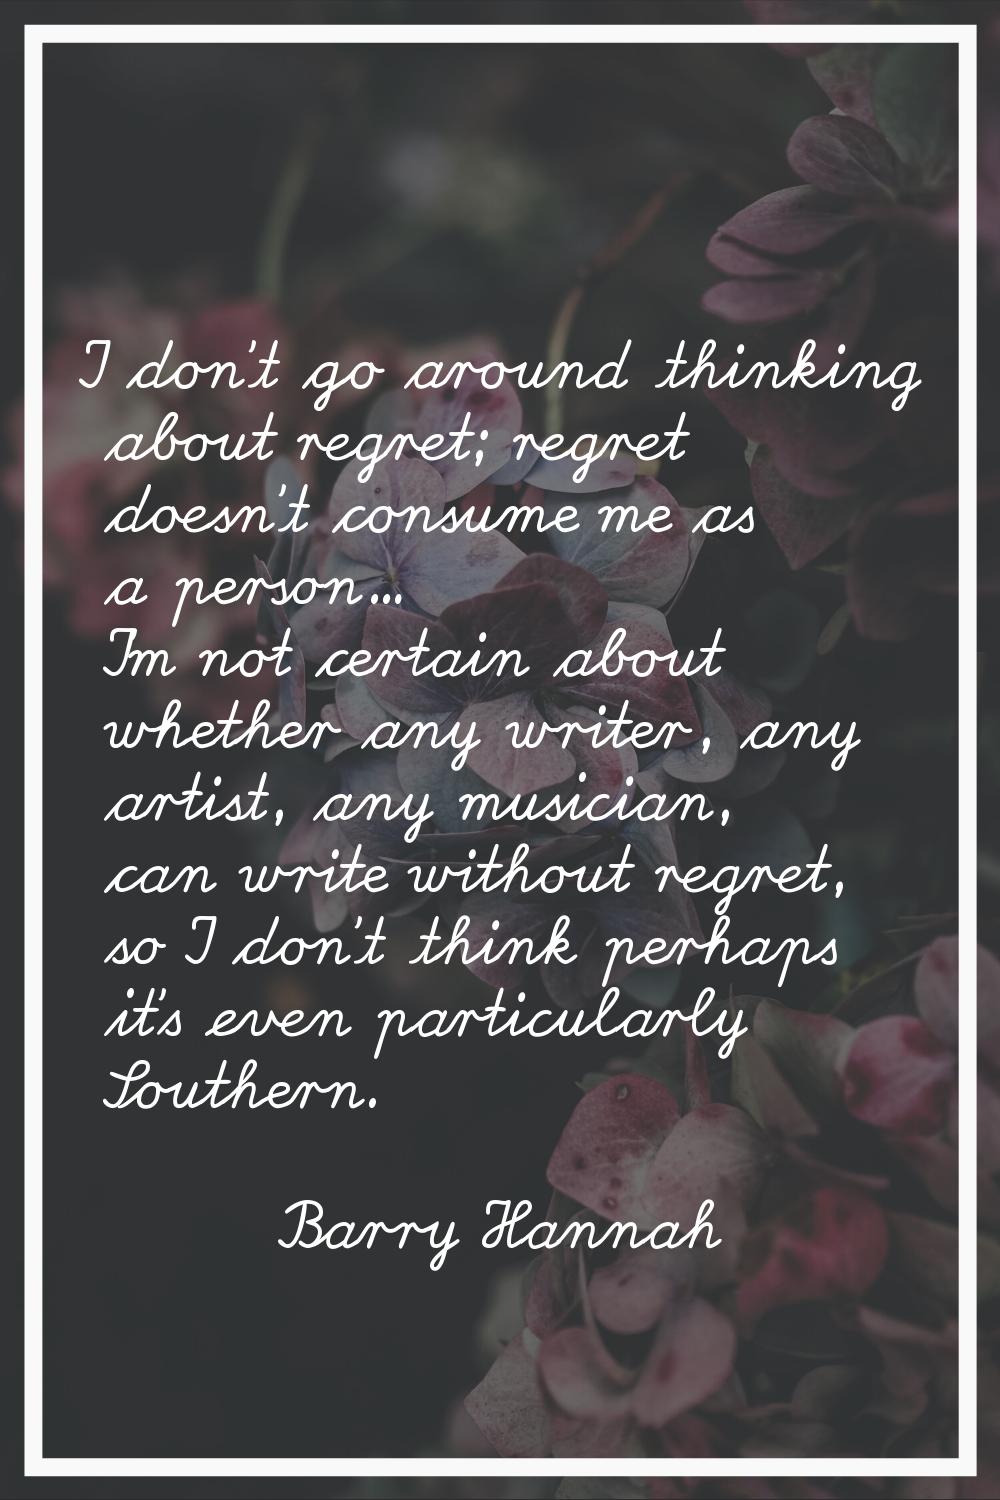 I don't go around thinking about regret; regret doesn't consume me as a person... I'm not certain a